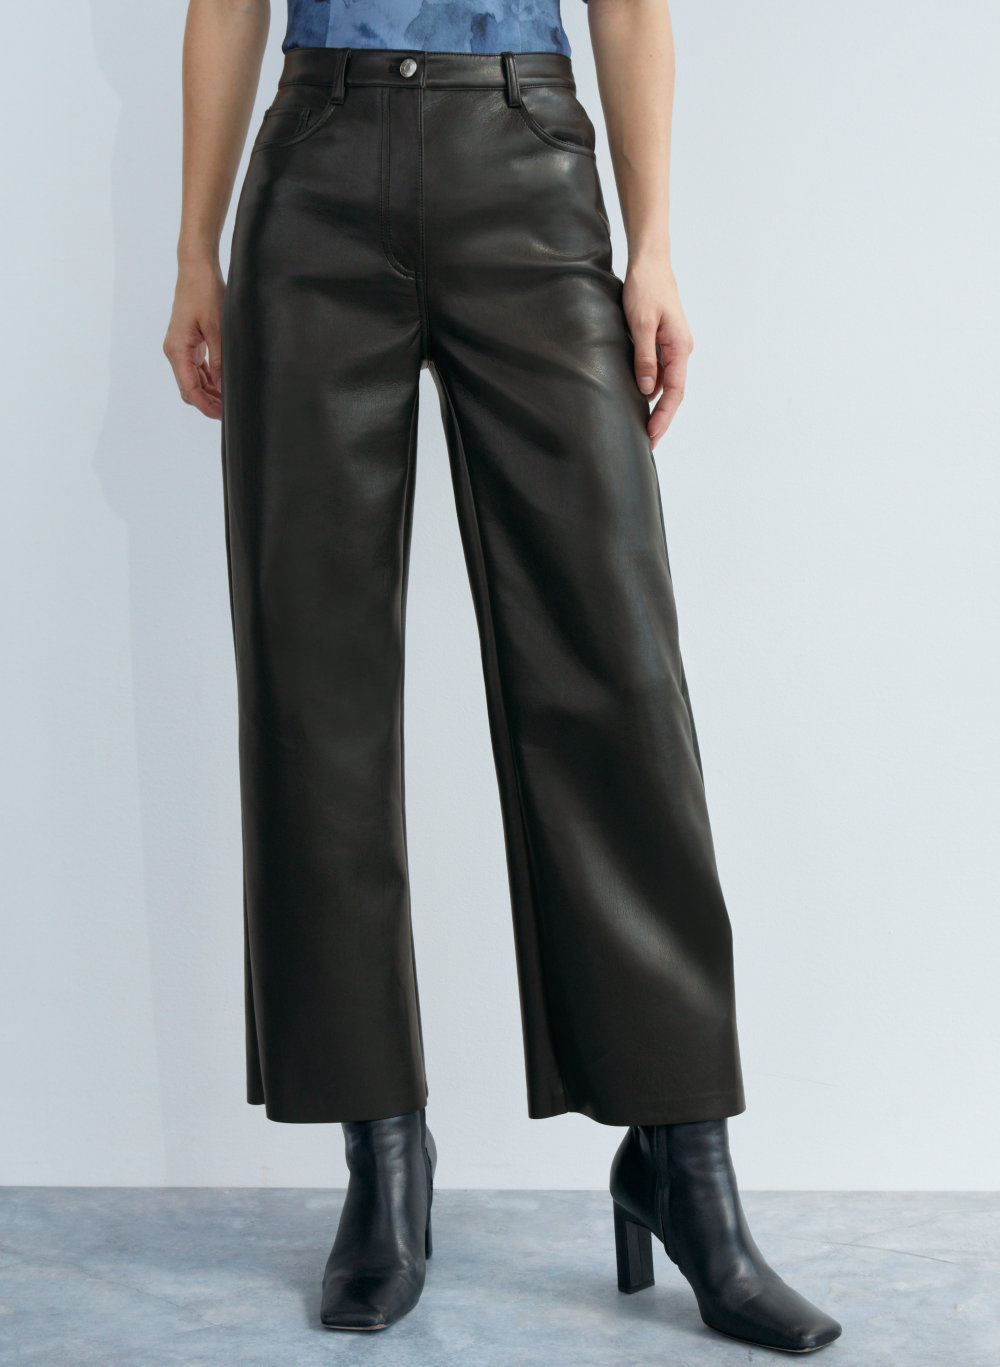 Faux Leather Wide Leg Pants High Street Ladies Loose Flare